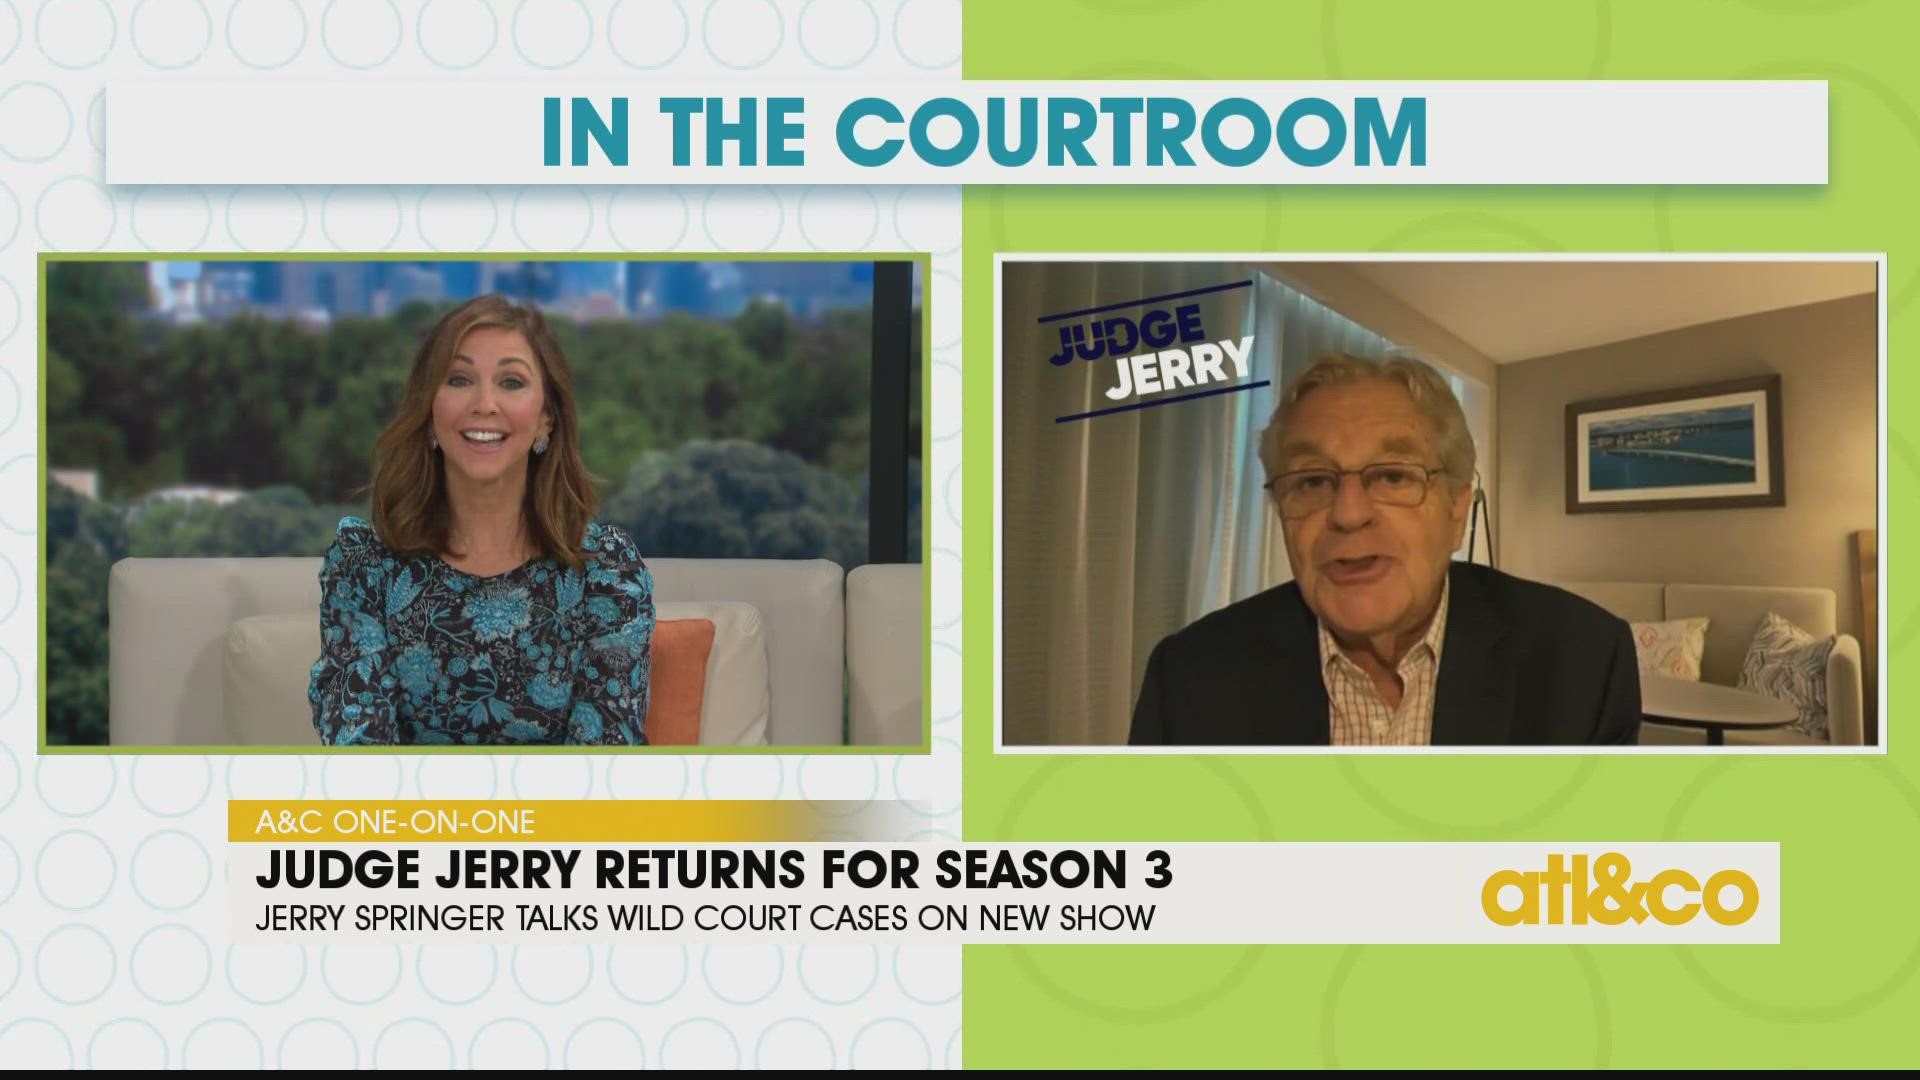 Court is back in session! Judge Jerry Springer talks wild court cases on WATL.